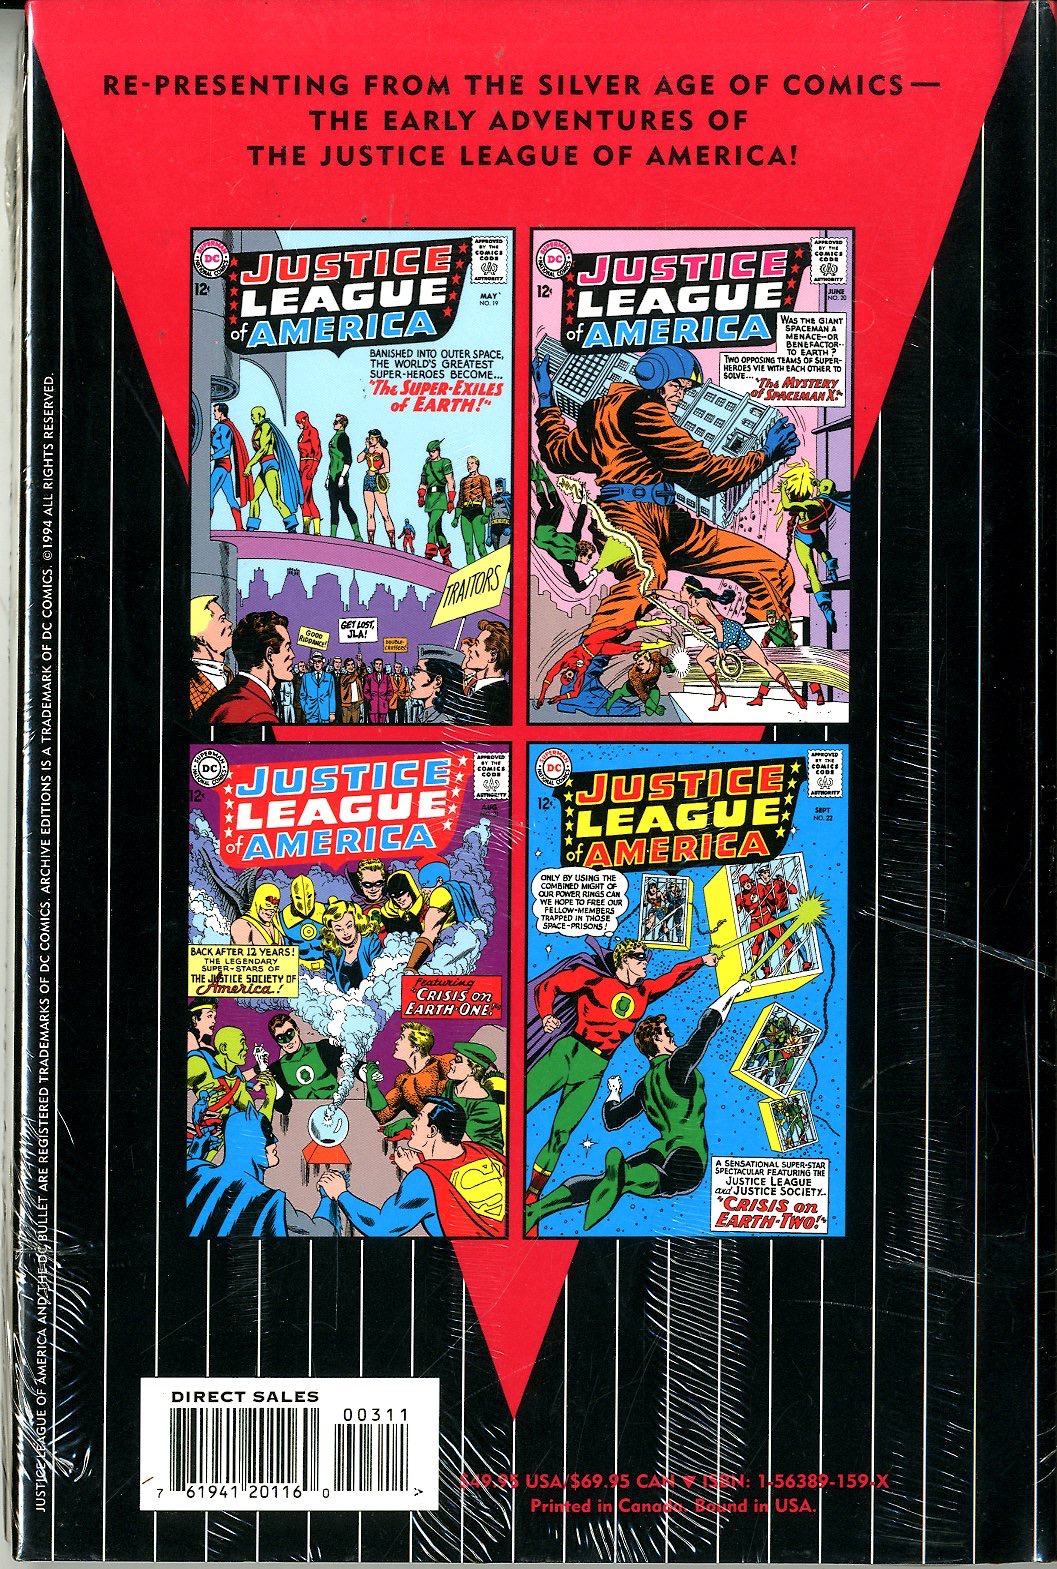 Archive Editions Justice League Of America - 11246